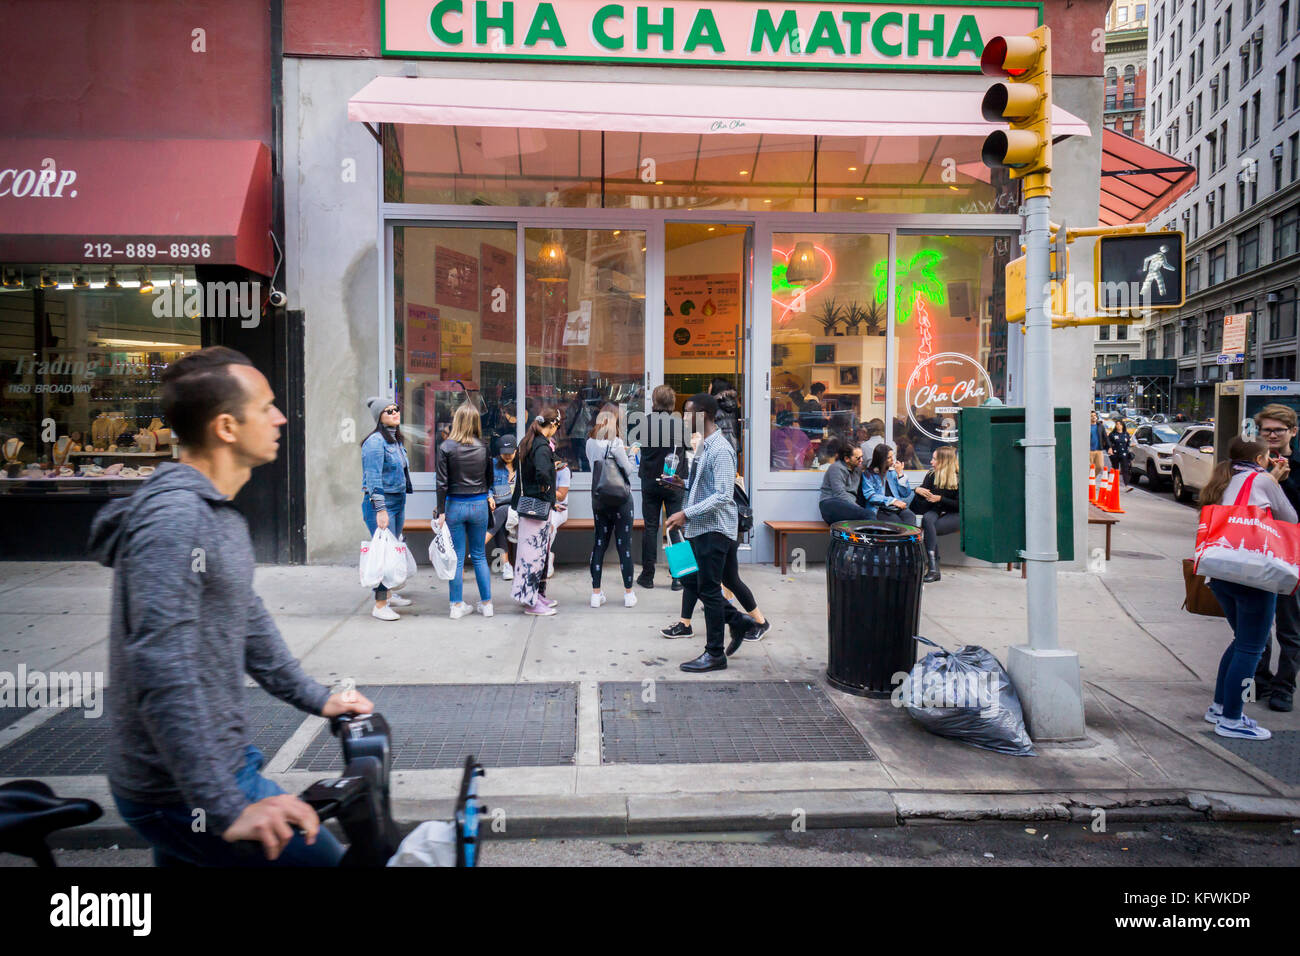 People line up for their fix of matcha at Cha Cha Matcha in the NoMad neighborhood of New York on Saturday, October 28, 2017. The popular beverage, matcha, is ground green tea and is used in Cha Cha Matcha to make instagramable beverages popular with millennials. Loaded with antioxidants matcha supposedly has medicinal qualities. (© Richard B. Levine) Stock Photo